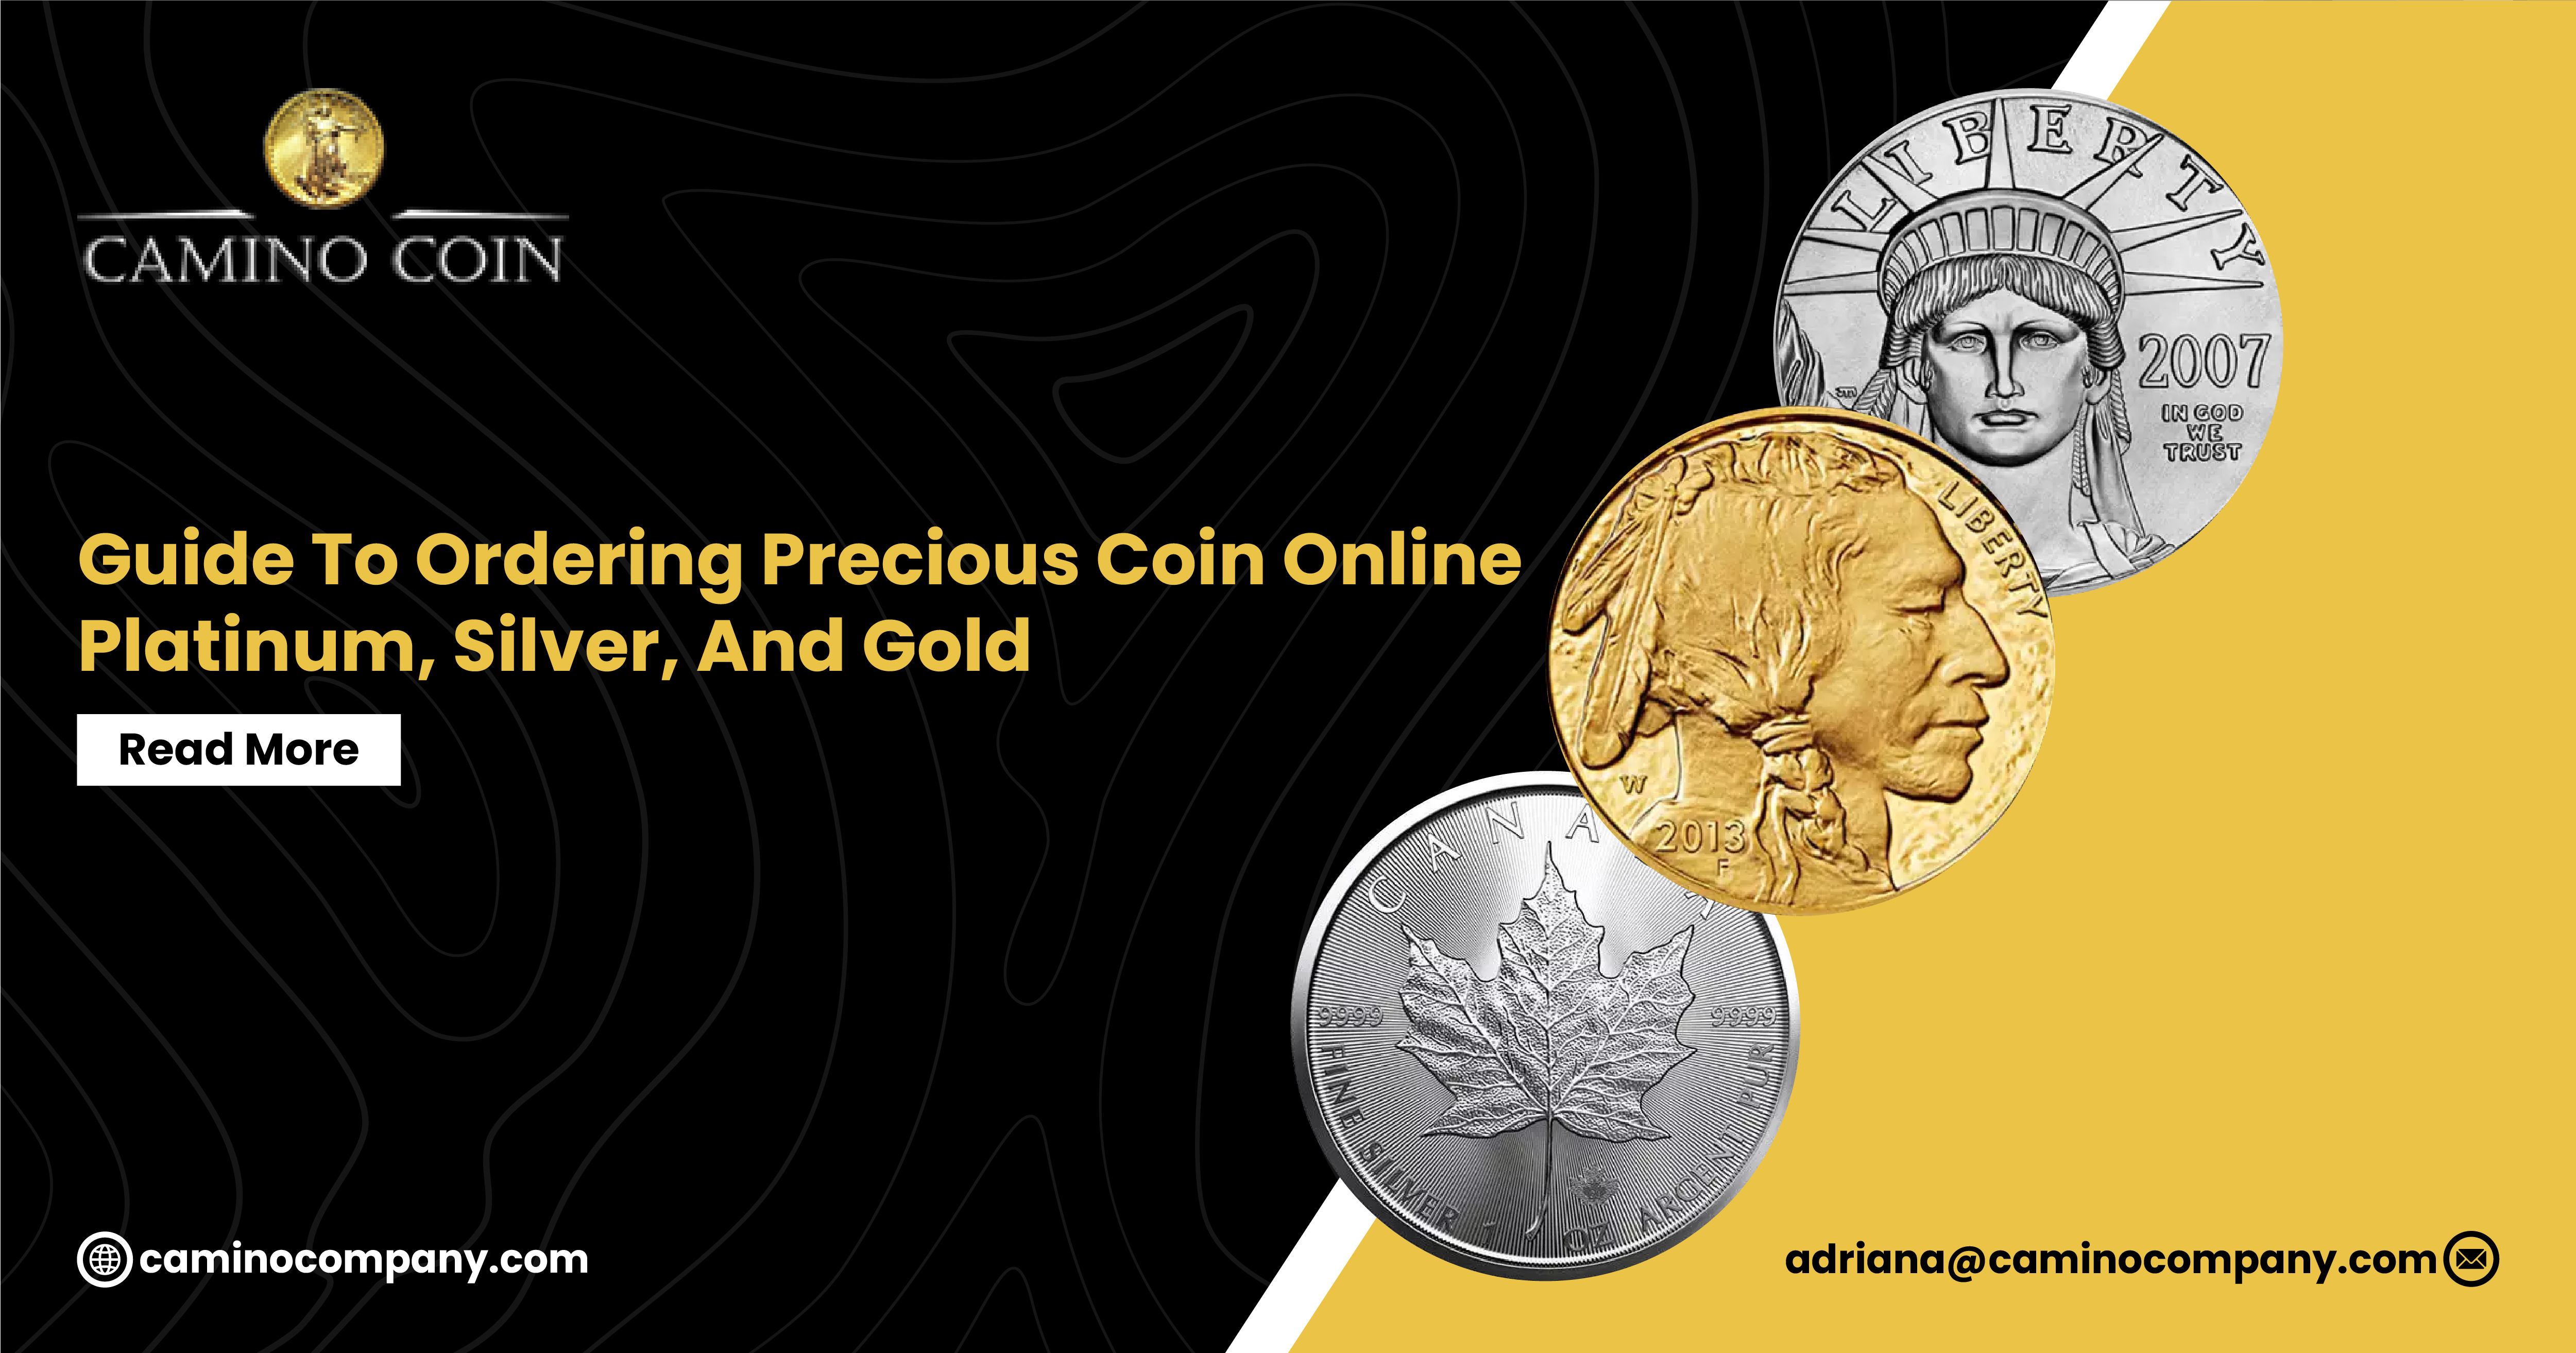 The Ultimate Guide to Ordering Precious Coin Online: Platinum, Silver, and Gold